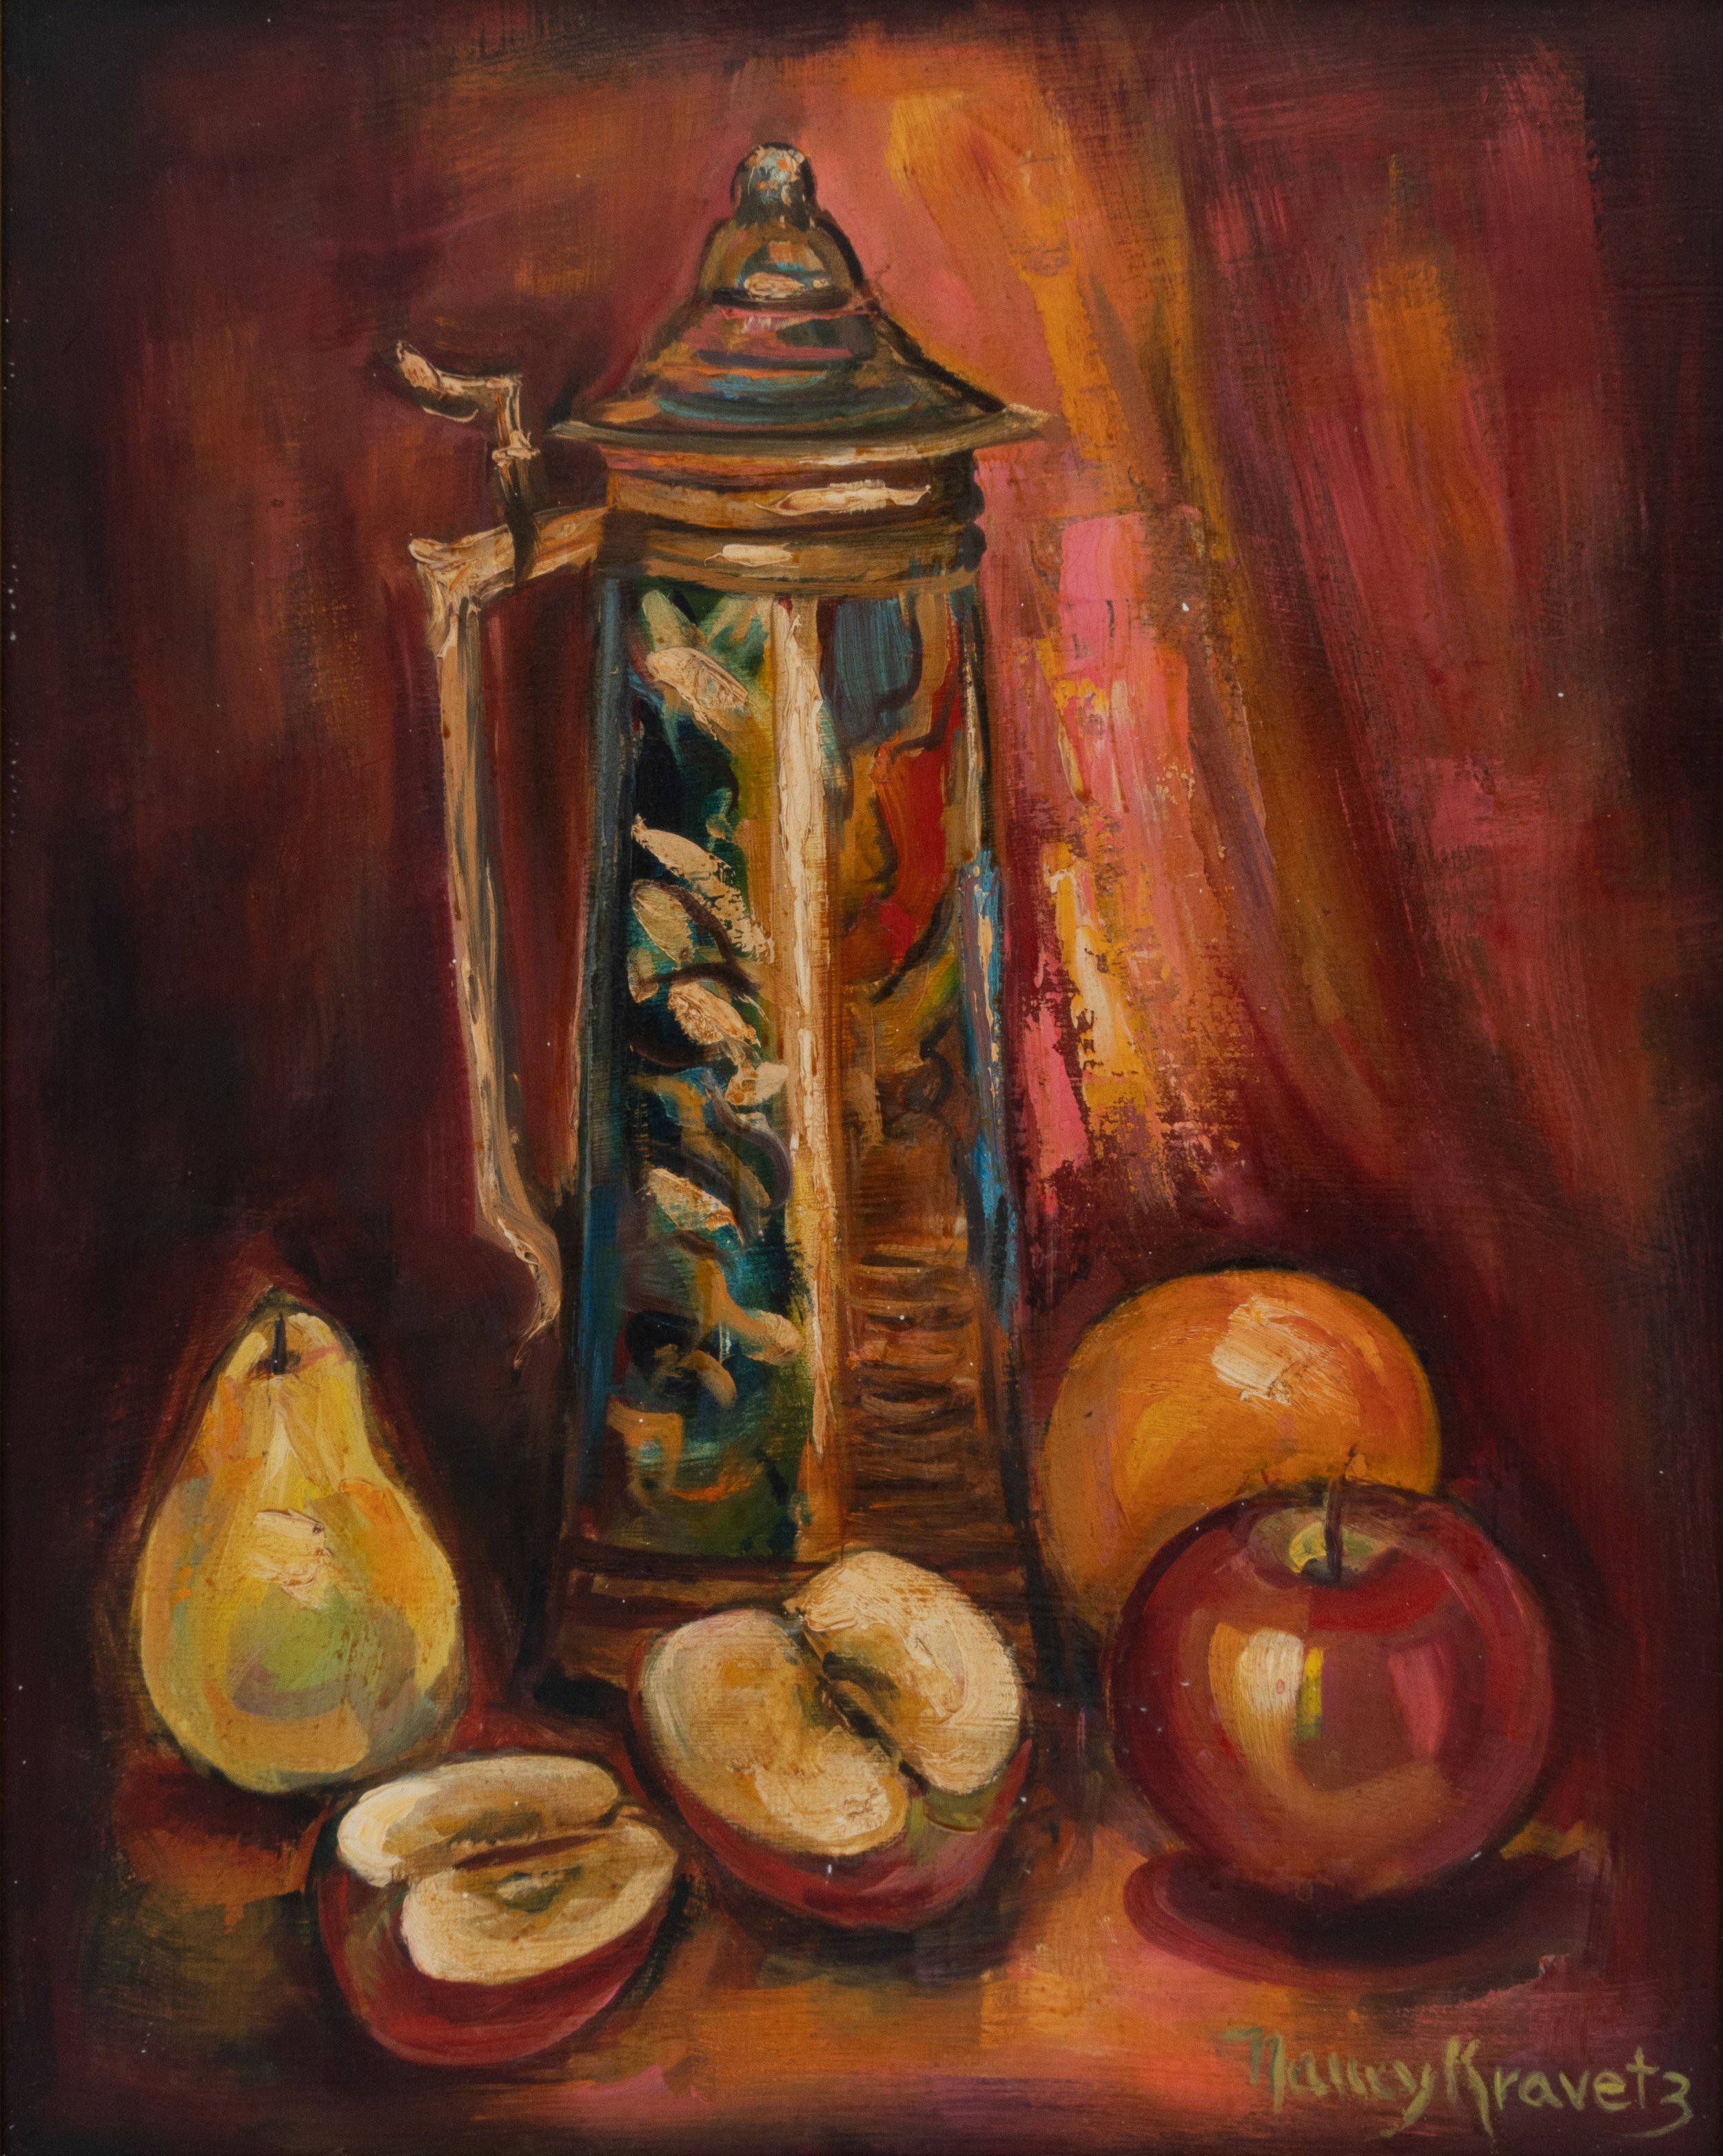 Pitcher and Fruit, 1968, oil on masonite, 20x16 inches